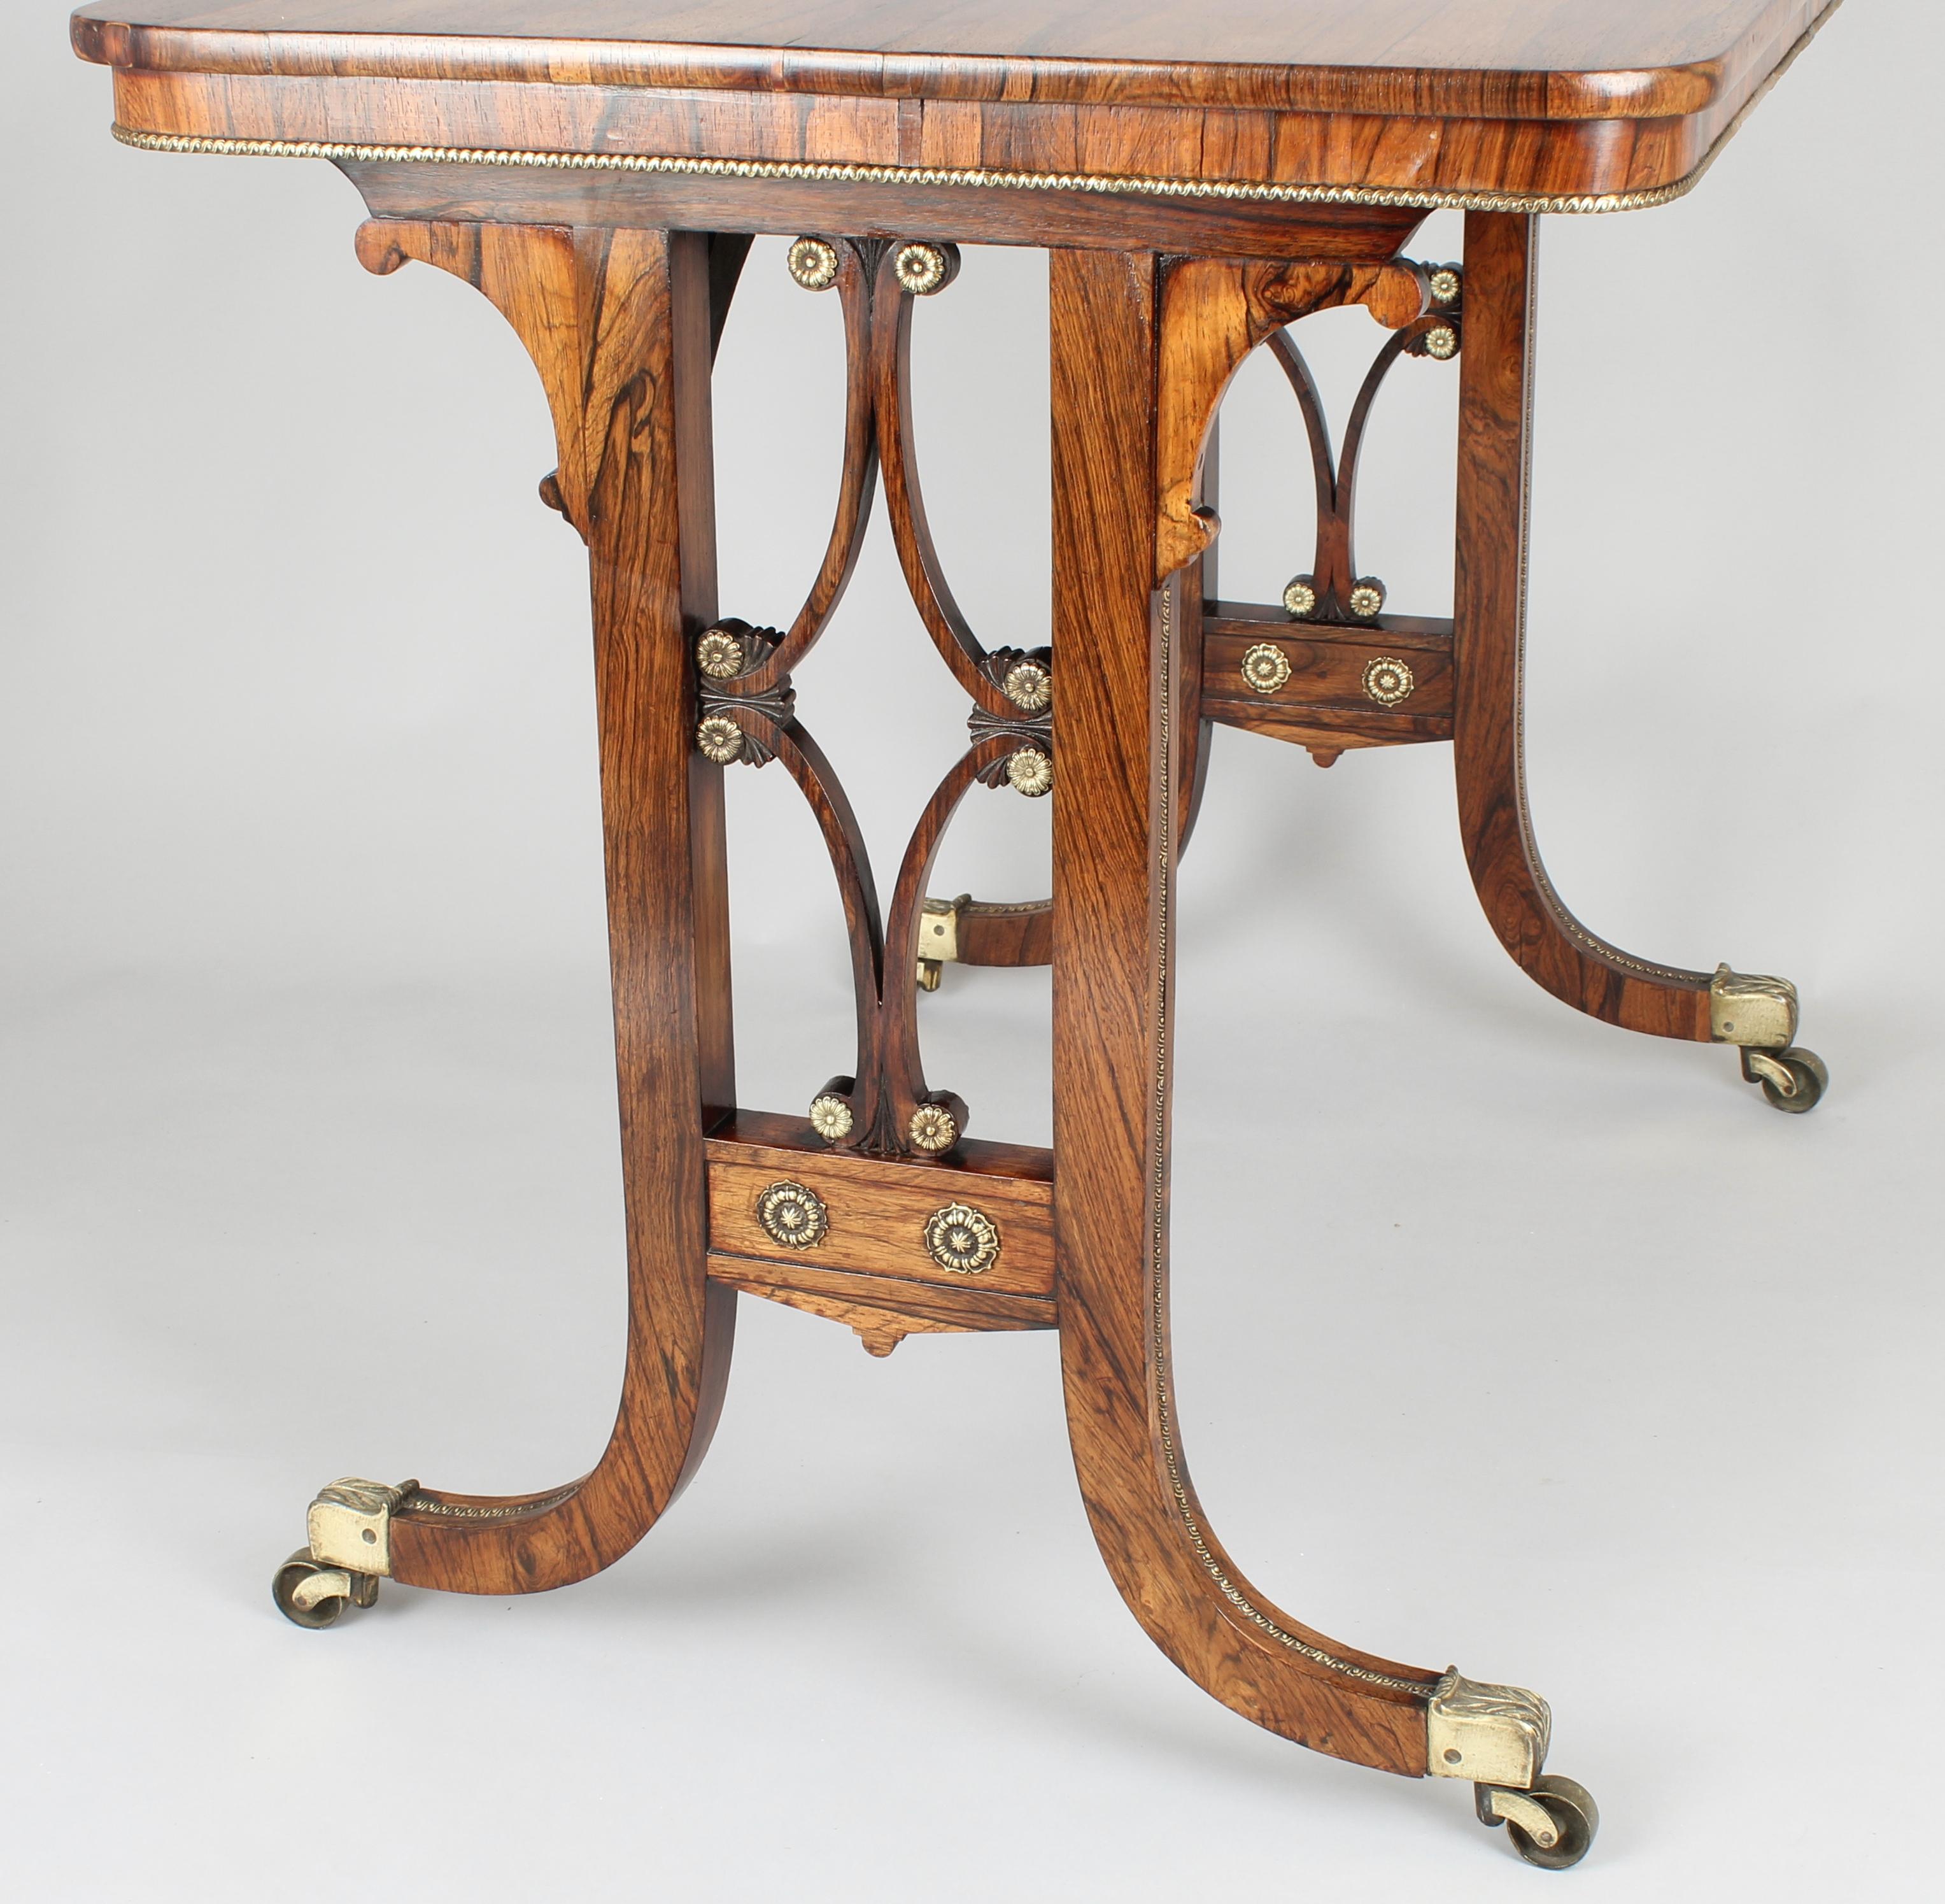 Fine Regency period rosewood end-standard centre-table of finely-figured timber; the top with rounded corners and an applied brass beaded border; on 'hockey-stick' legs with openwork scrollwork panels, applied with brass paterae, brass moldings and